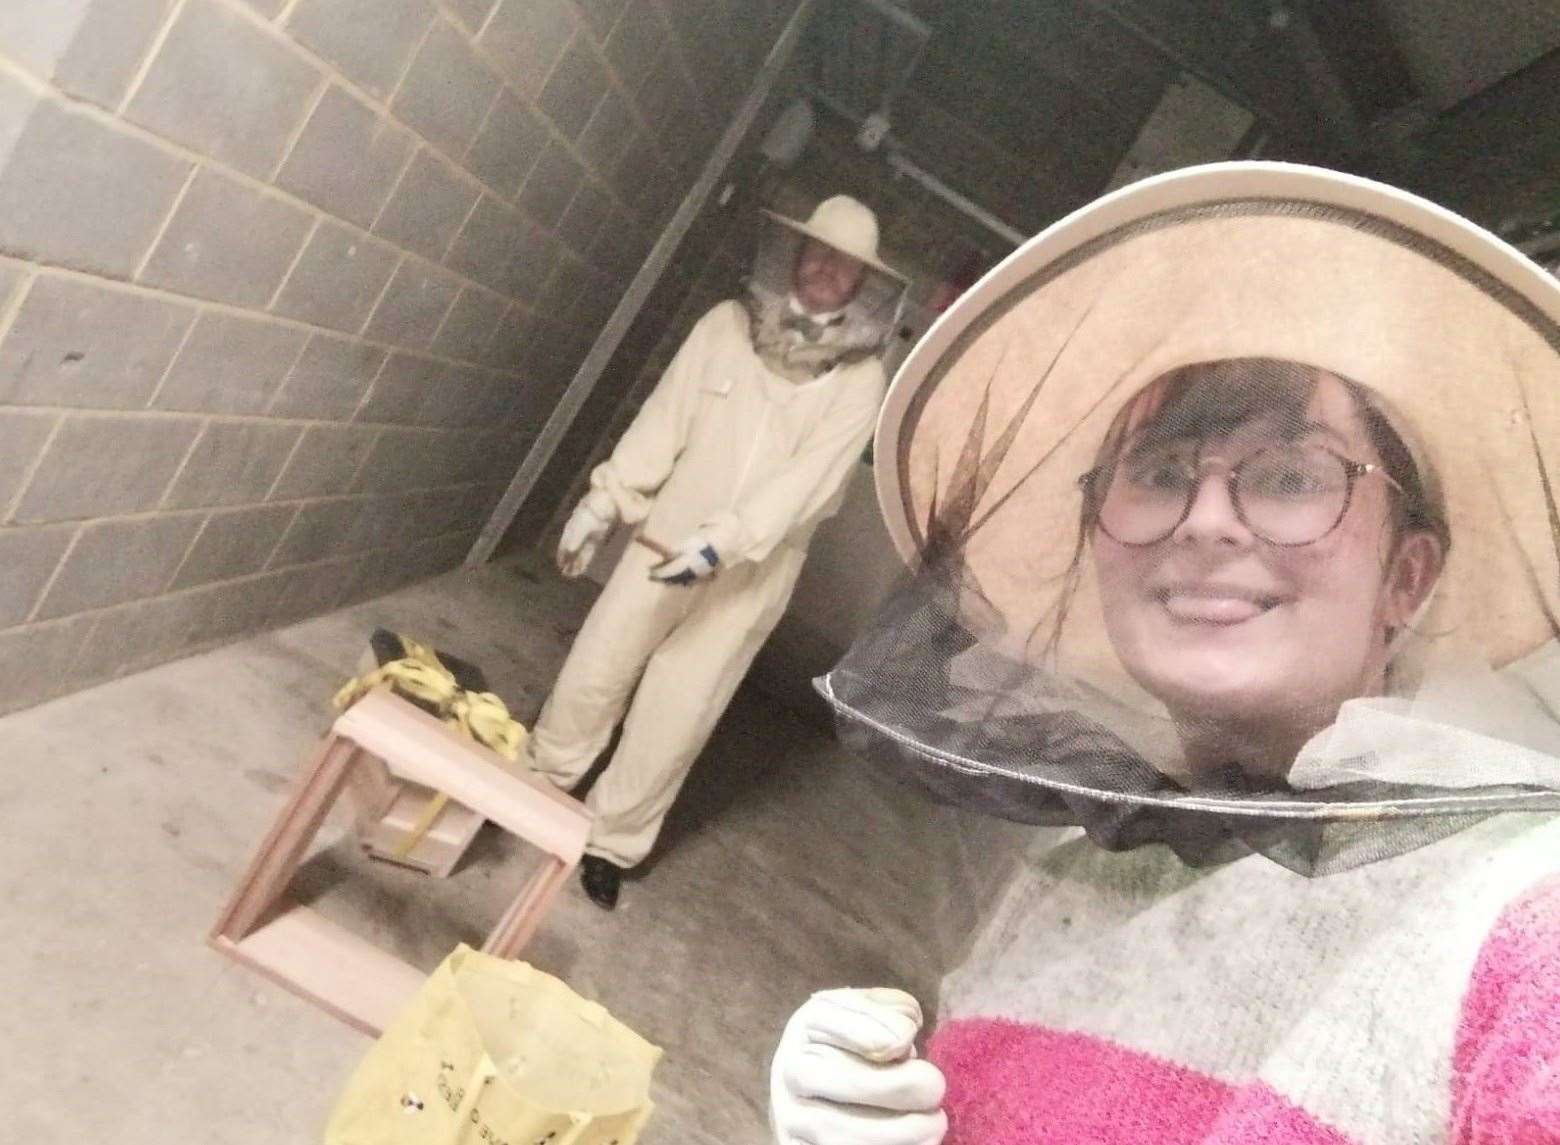 Beekeepers Stephanie Kalaichakis (front) and William Lay rehouse two swarms at Fremlin Walk shopping centre in Maidstone